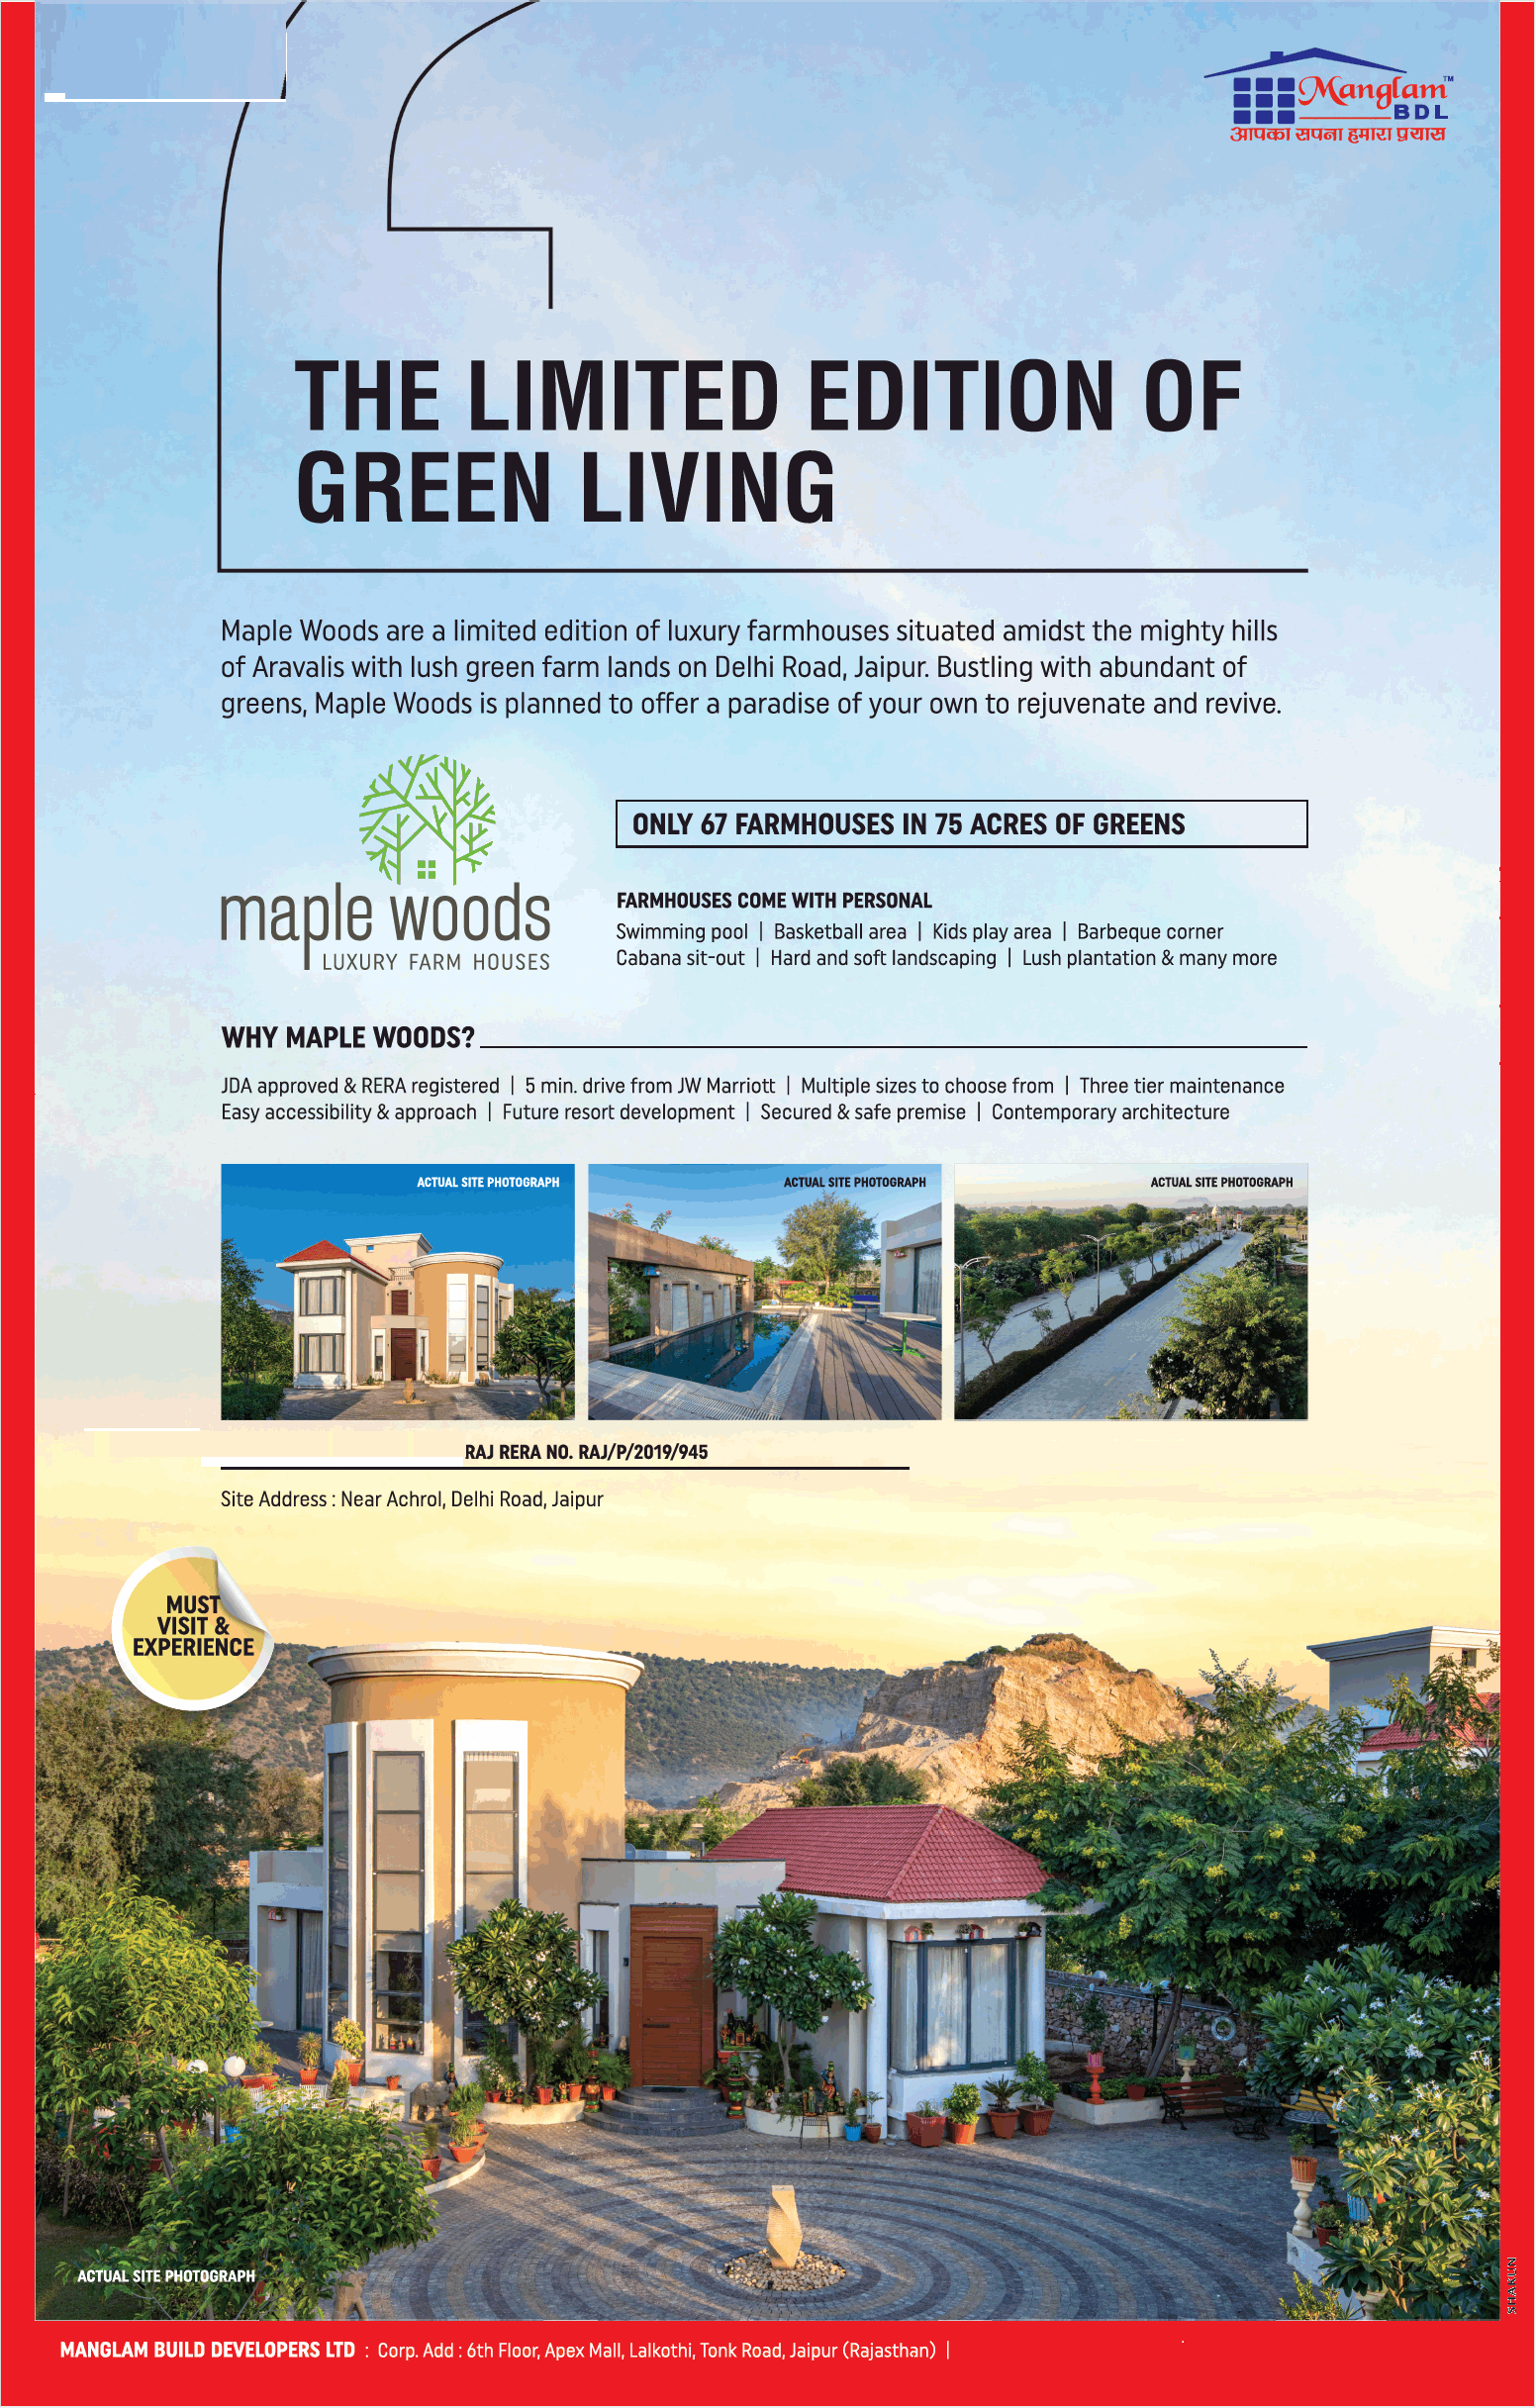 Presenting luxury farm house at Manglam Maple Woods in Jaipur Update